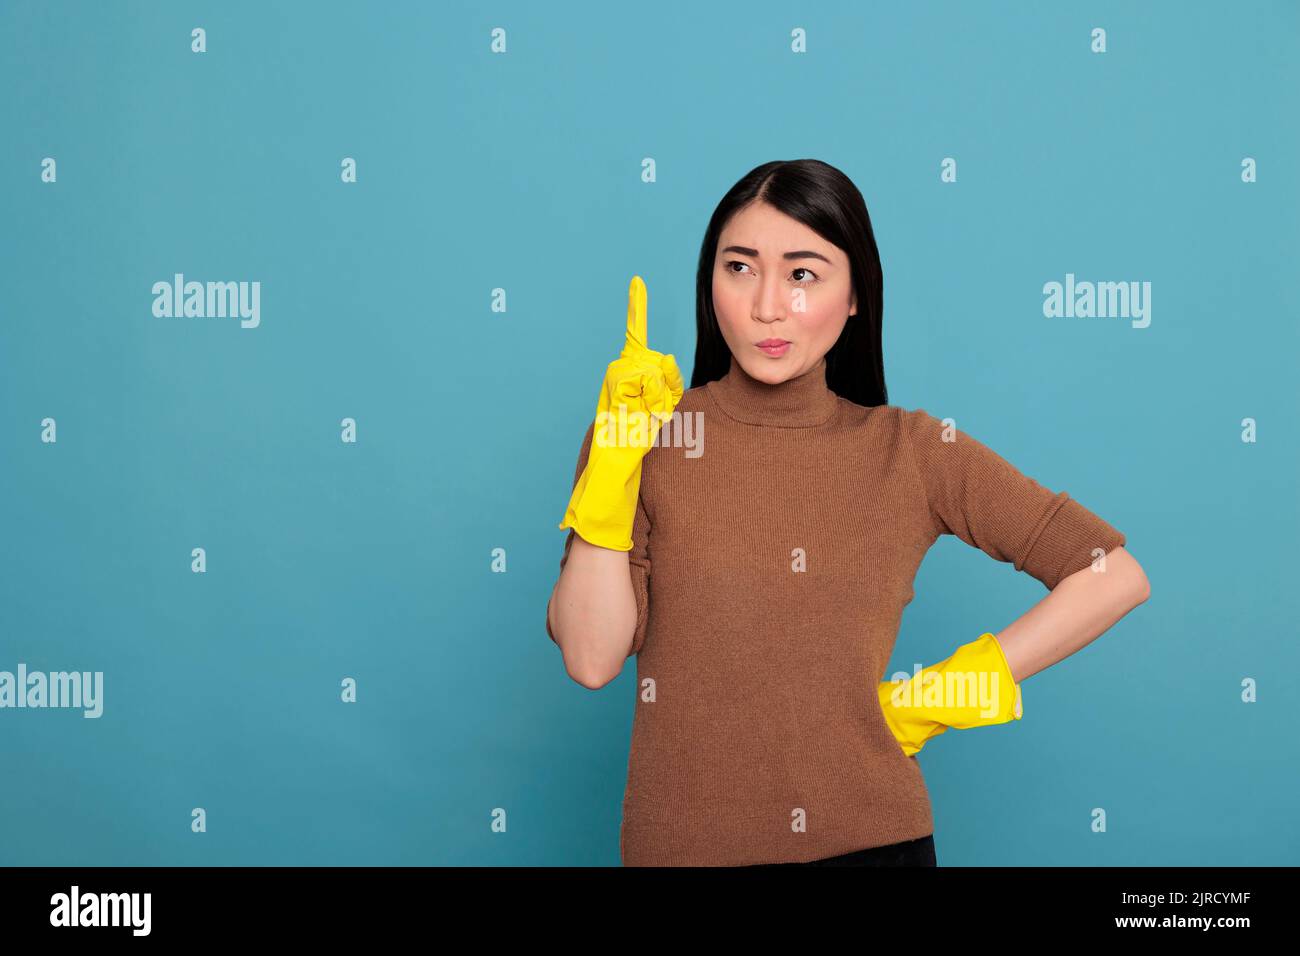 Young asian woman with contempt mood from chores wearing yellow gloves for hand safety and pointing finger upward look toward side isolated on a blue background, Cleaning home concept, Stock Photo